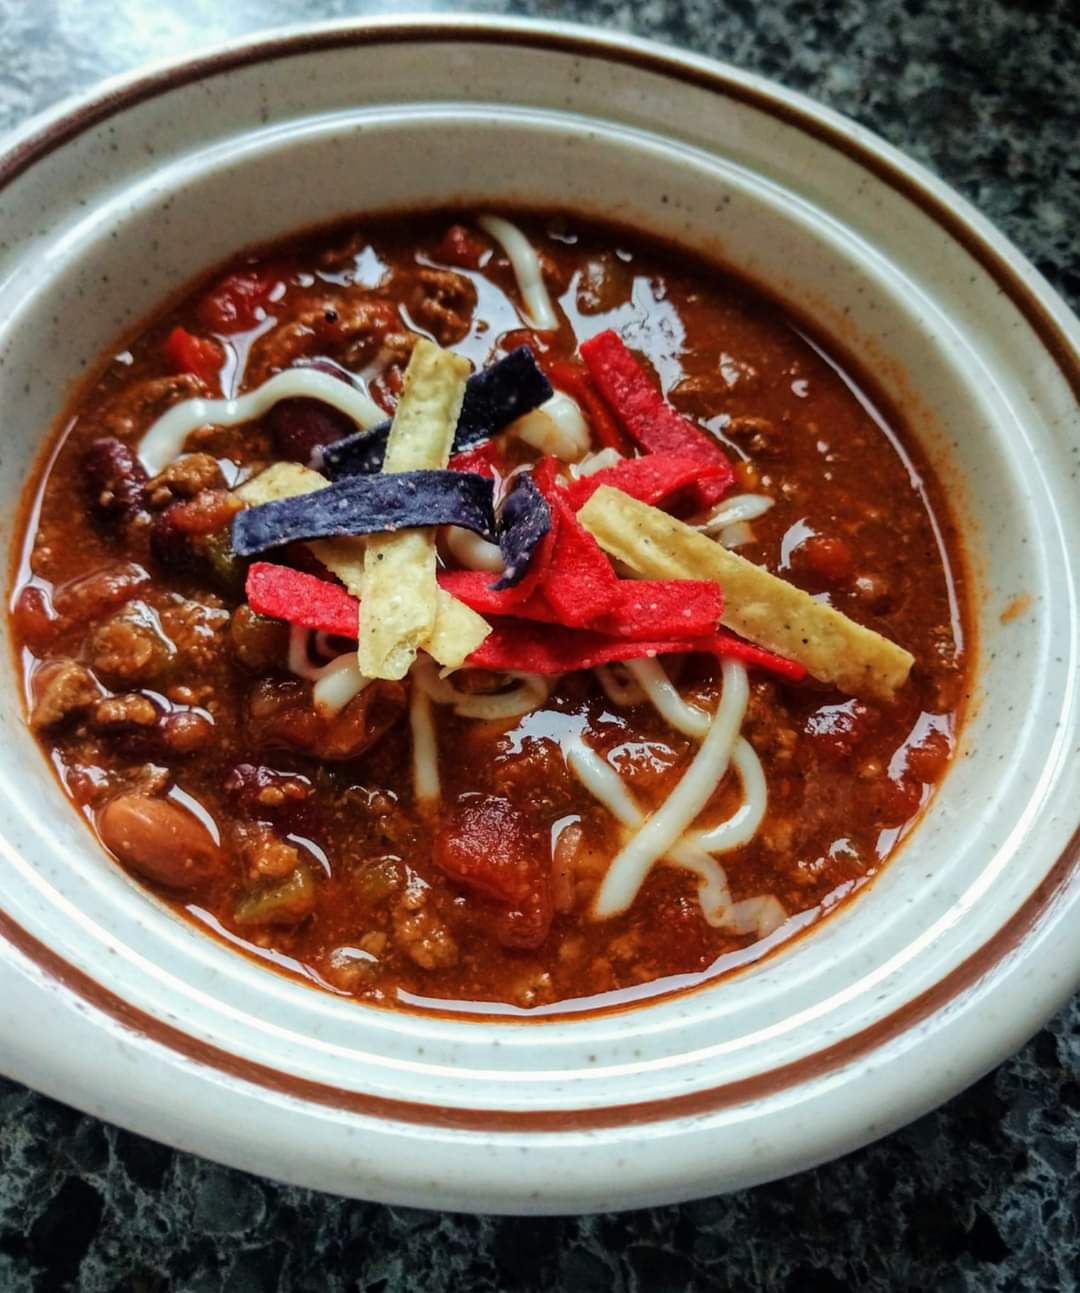 A bowl of bison chili.